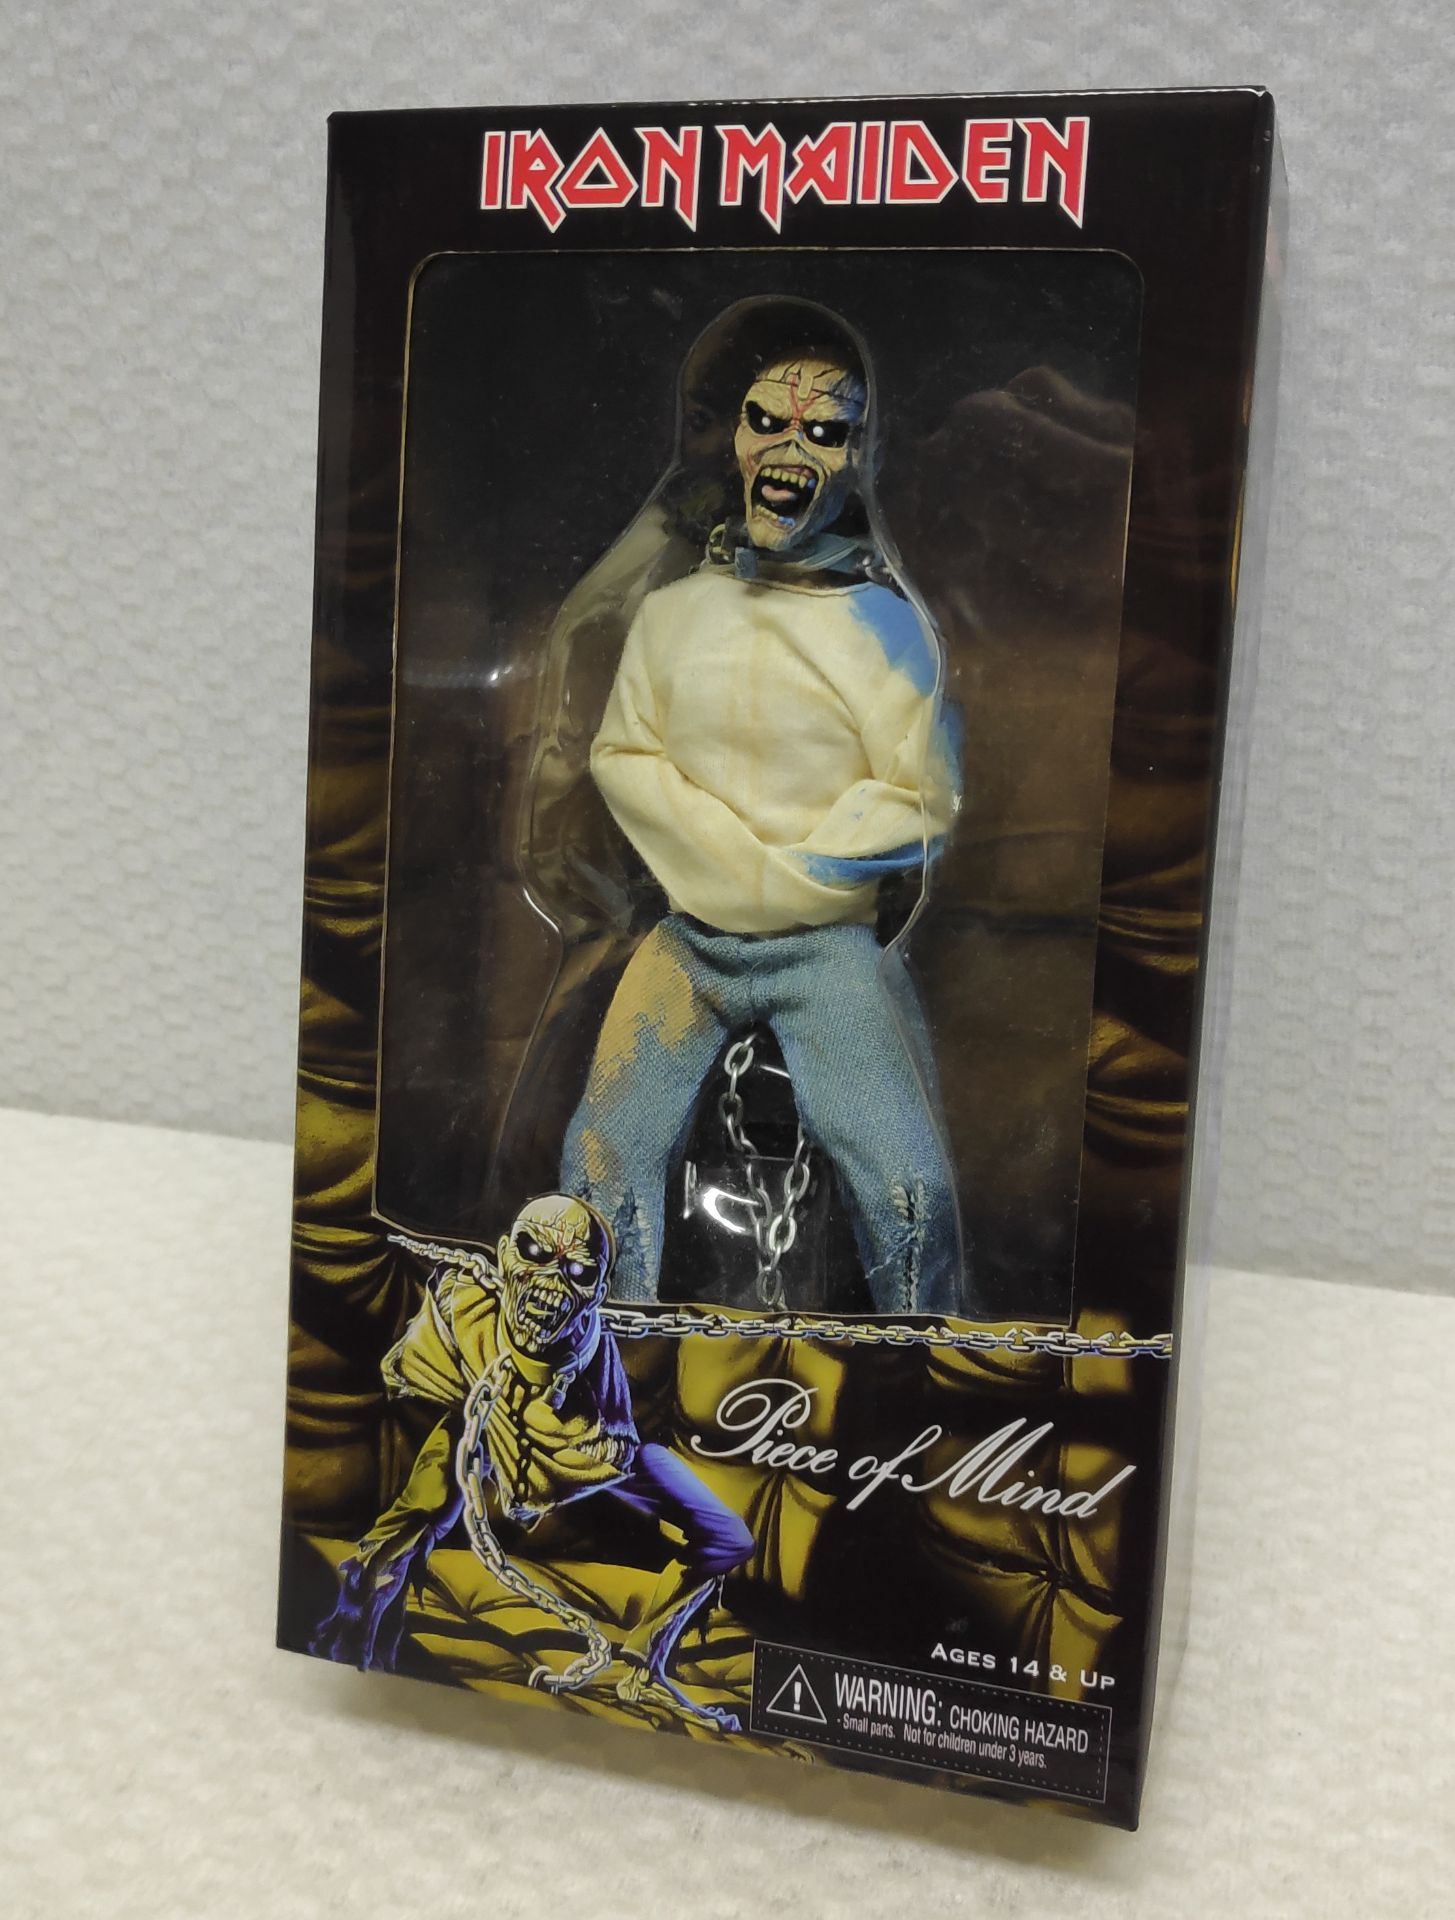 1 x Iron Maiden Eddie Piece of Mind NECA Action Figure - New/Boxed - HTYS166 - CL720 - Location: Alt - Image 3 of 11